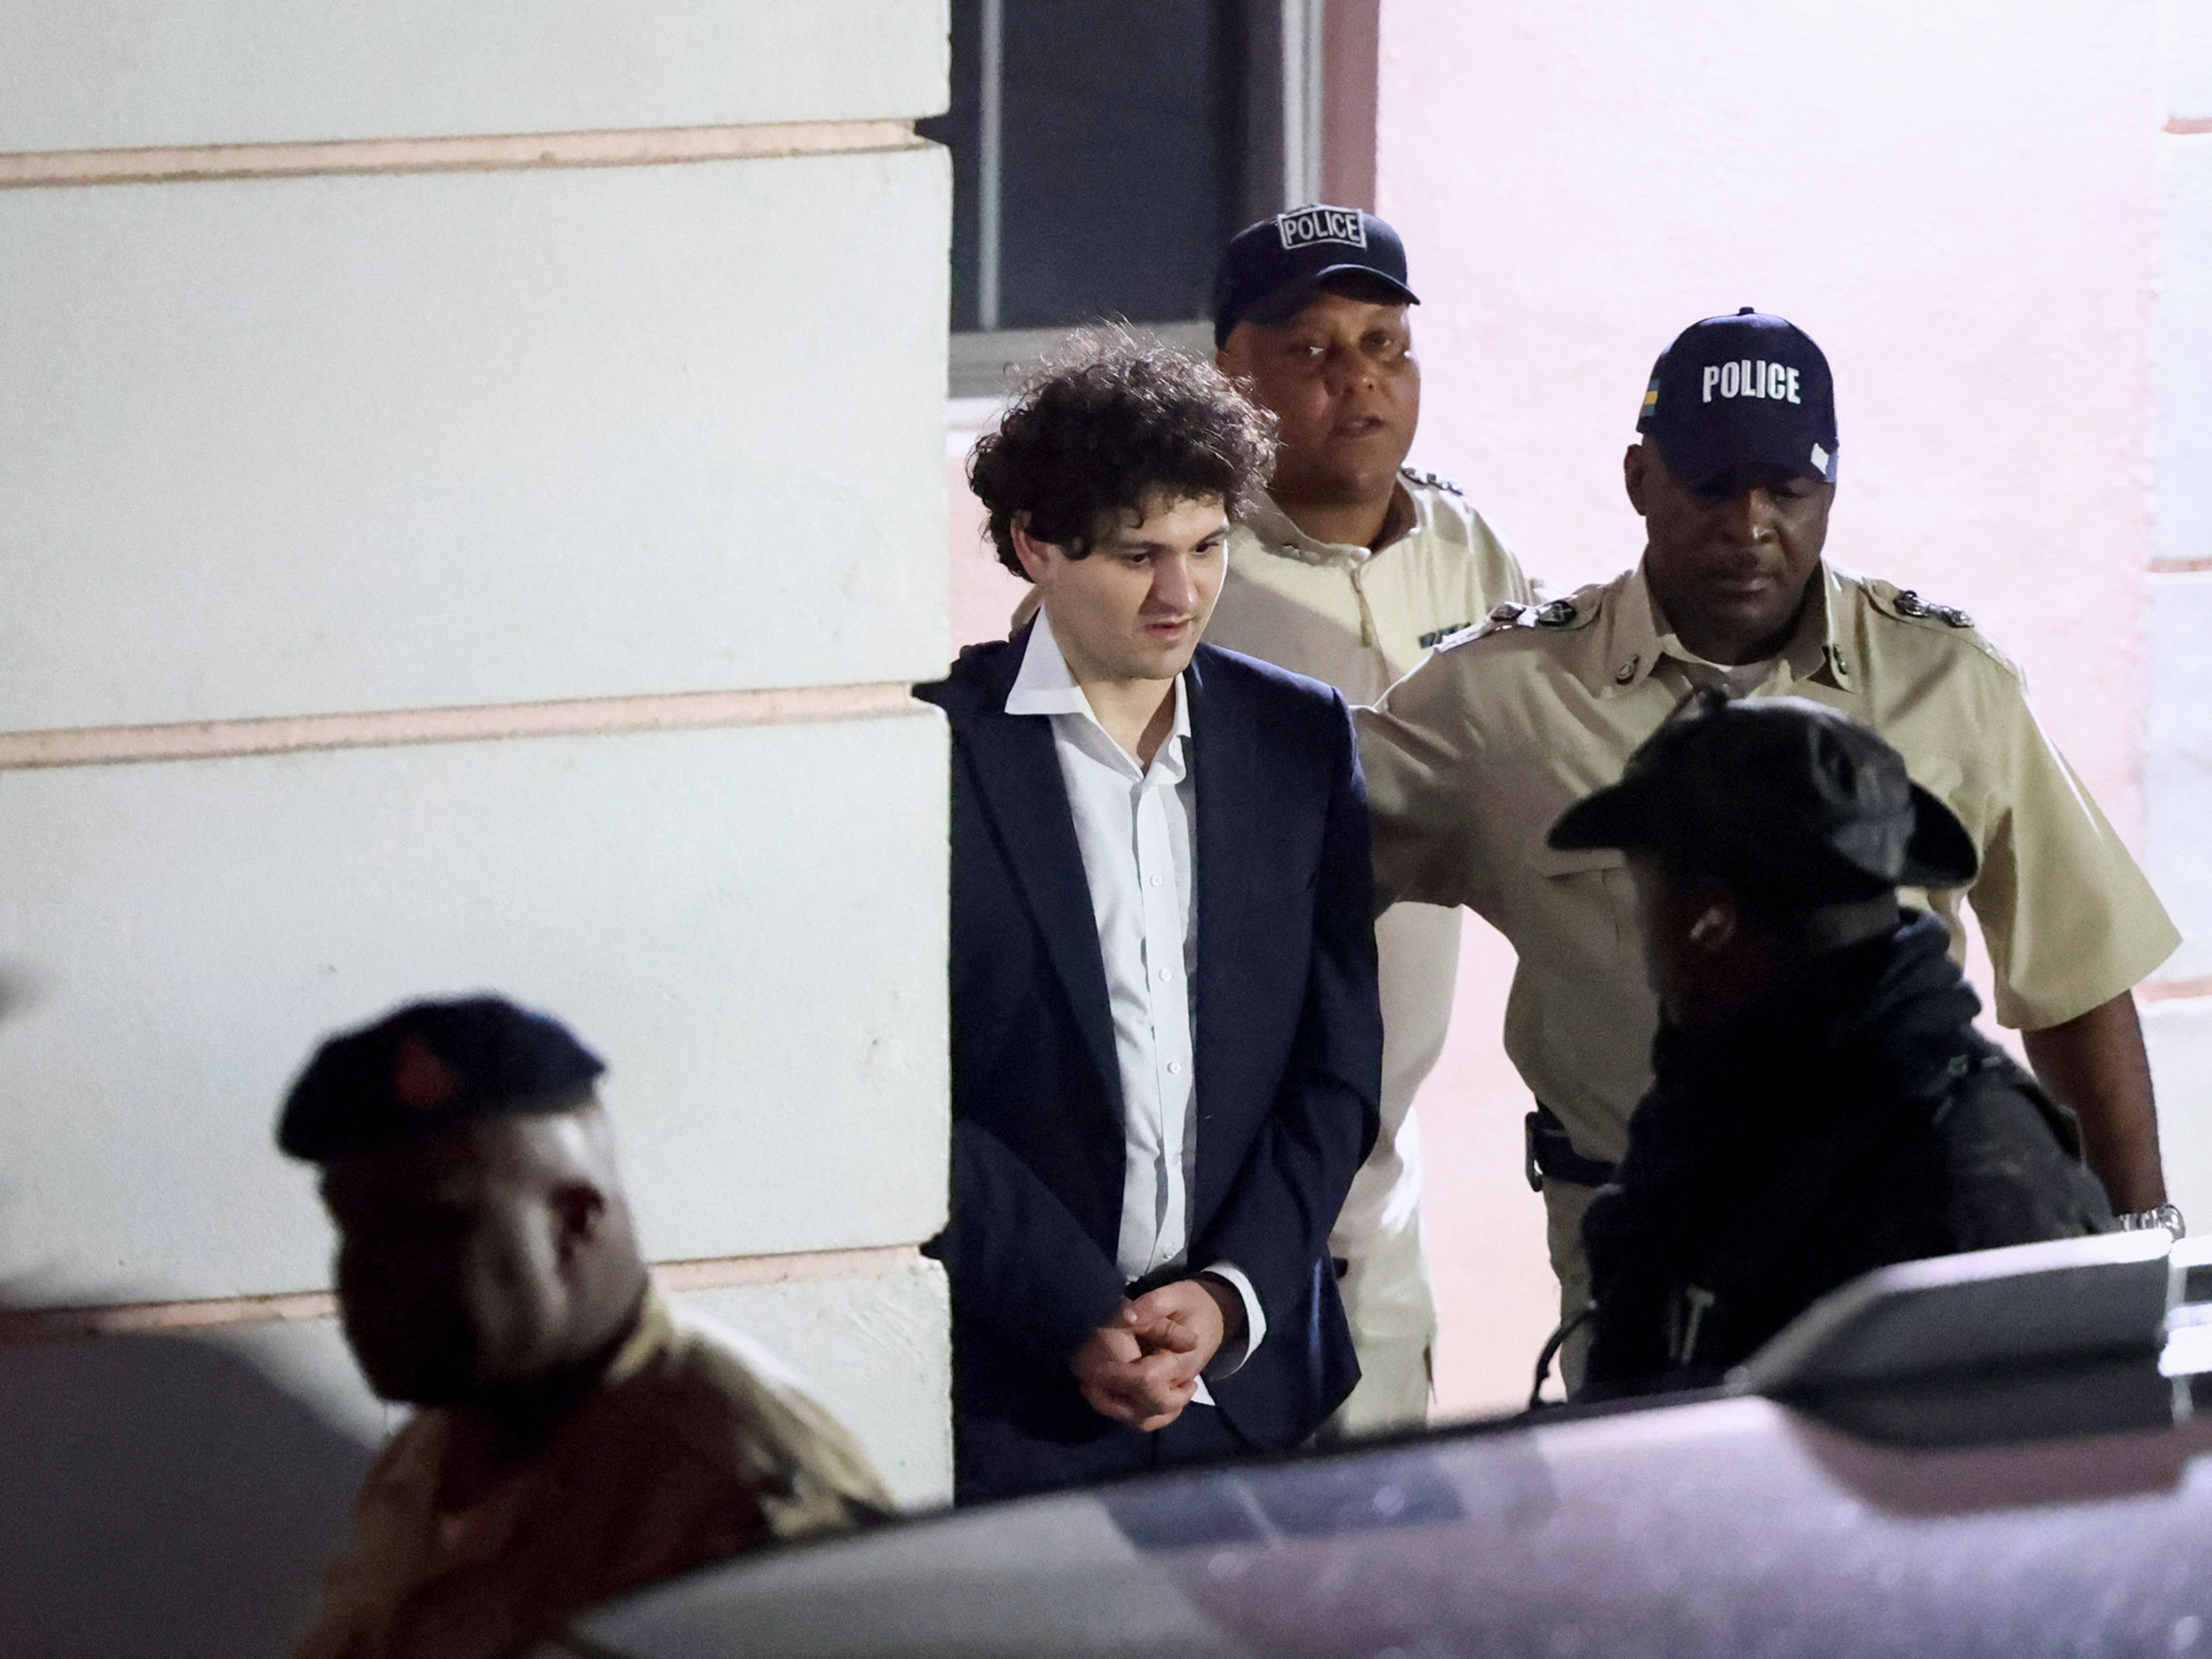 Sam Bankman-Fried is escorted out of the Magistrate Court building after his arrest, in Nassau, Bahamas, on December 13, 2022.